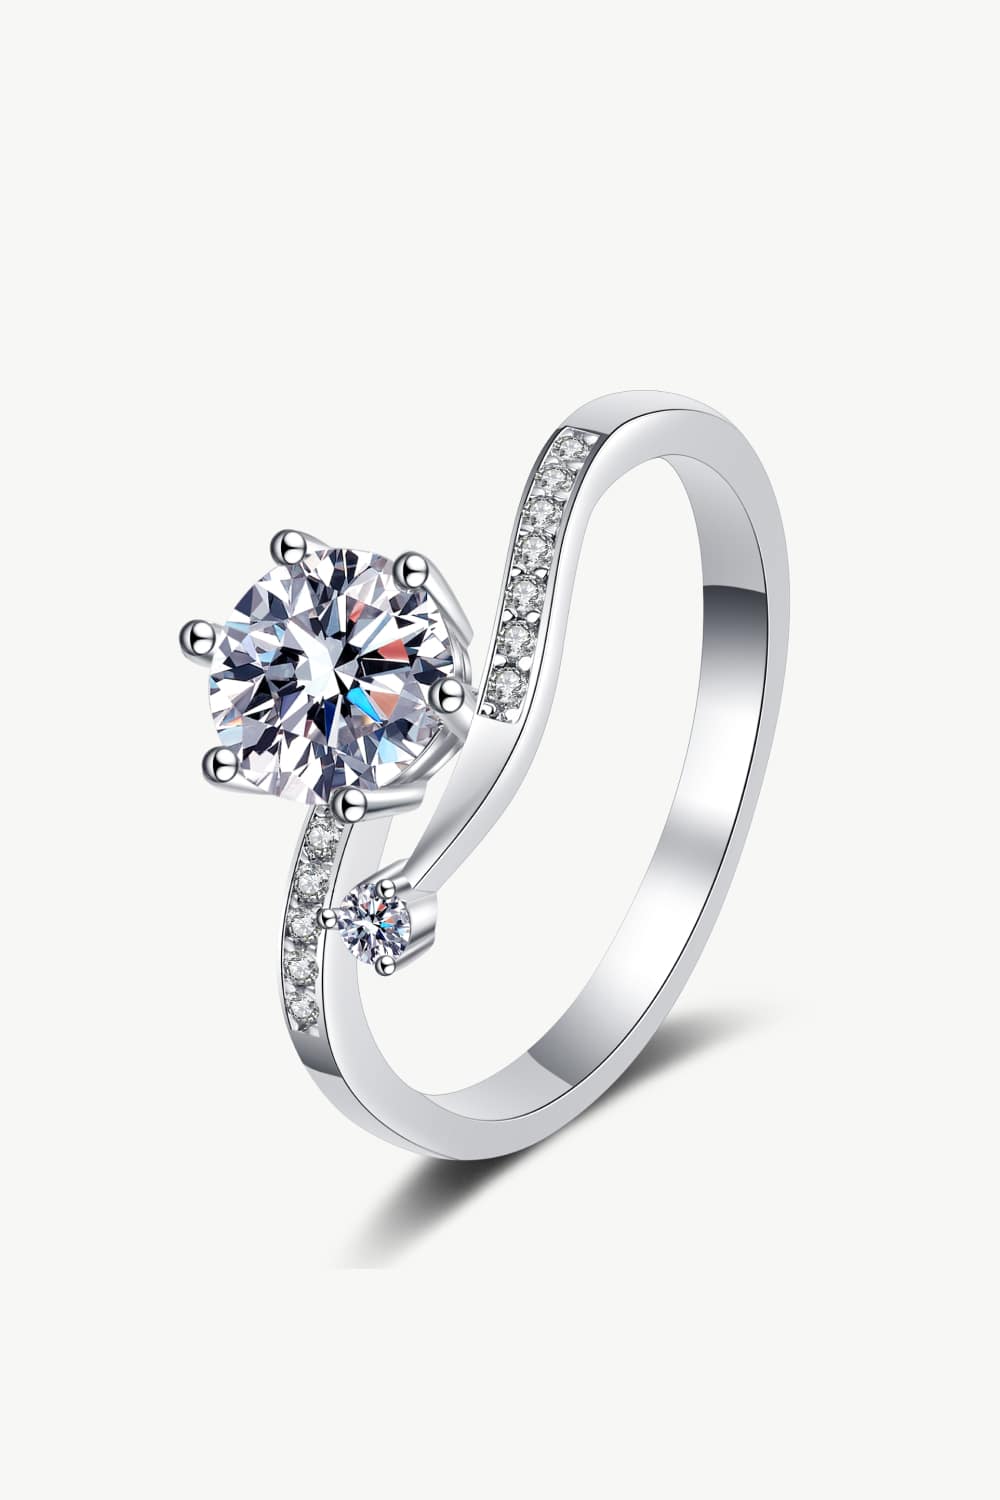 1/2 Carat Moissanite with Zircon Accents 925 Sterling Silver Ring